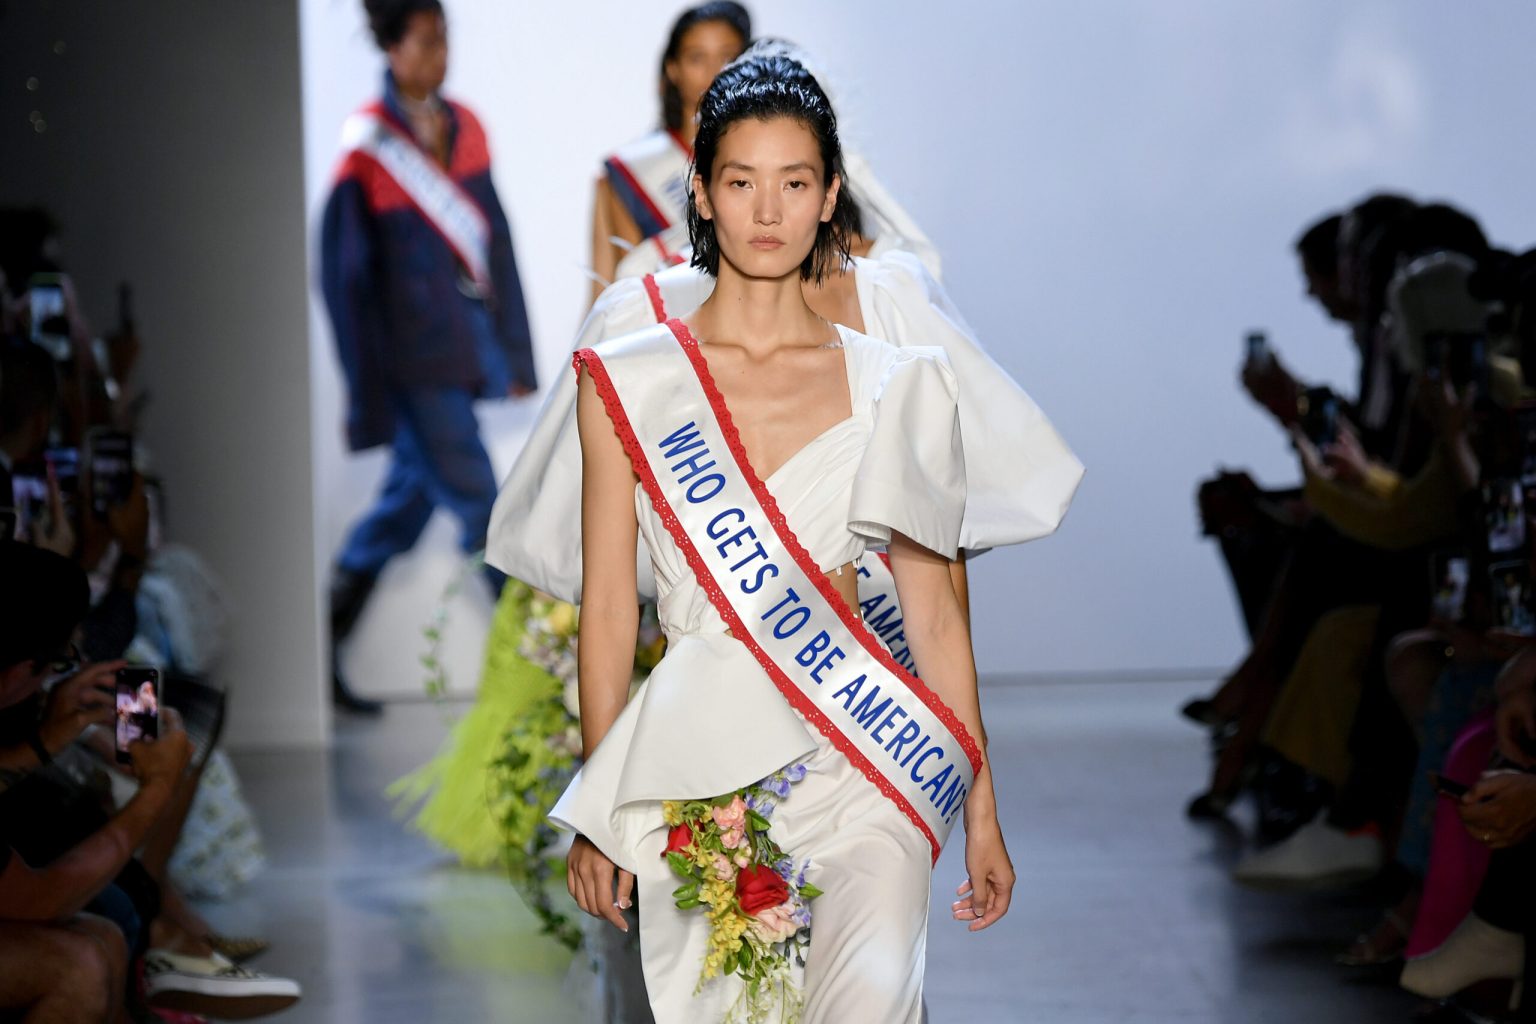 210108130909 01 prabal gurung who gets to be american 2019 scaled 1